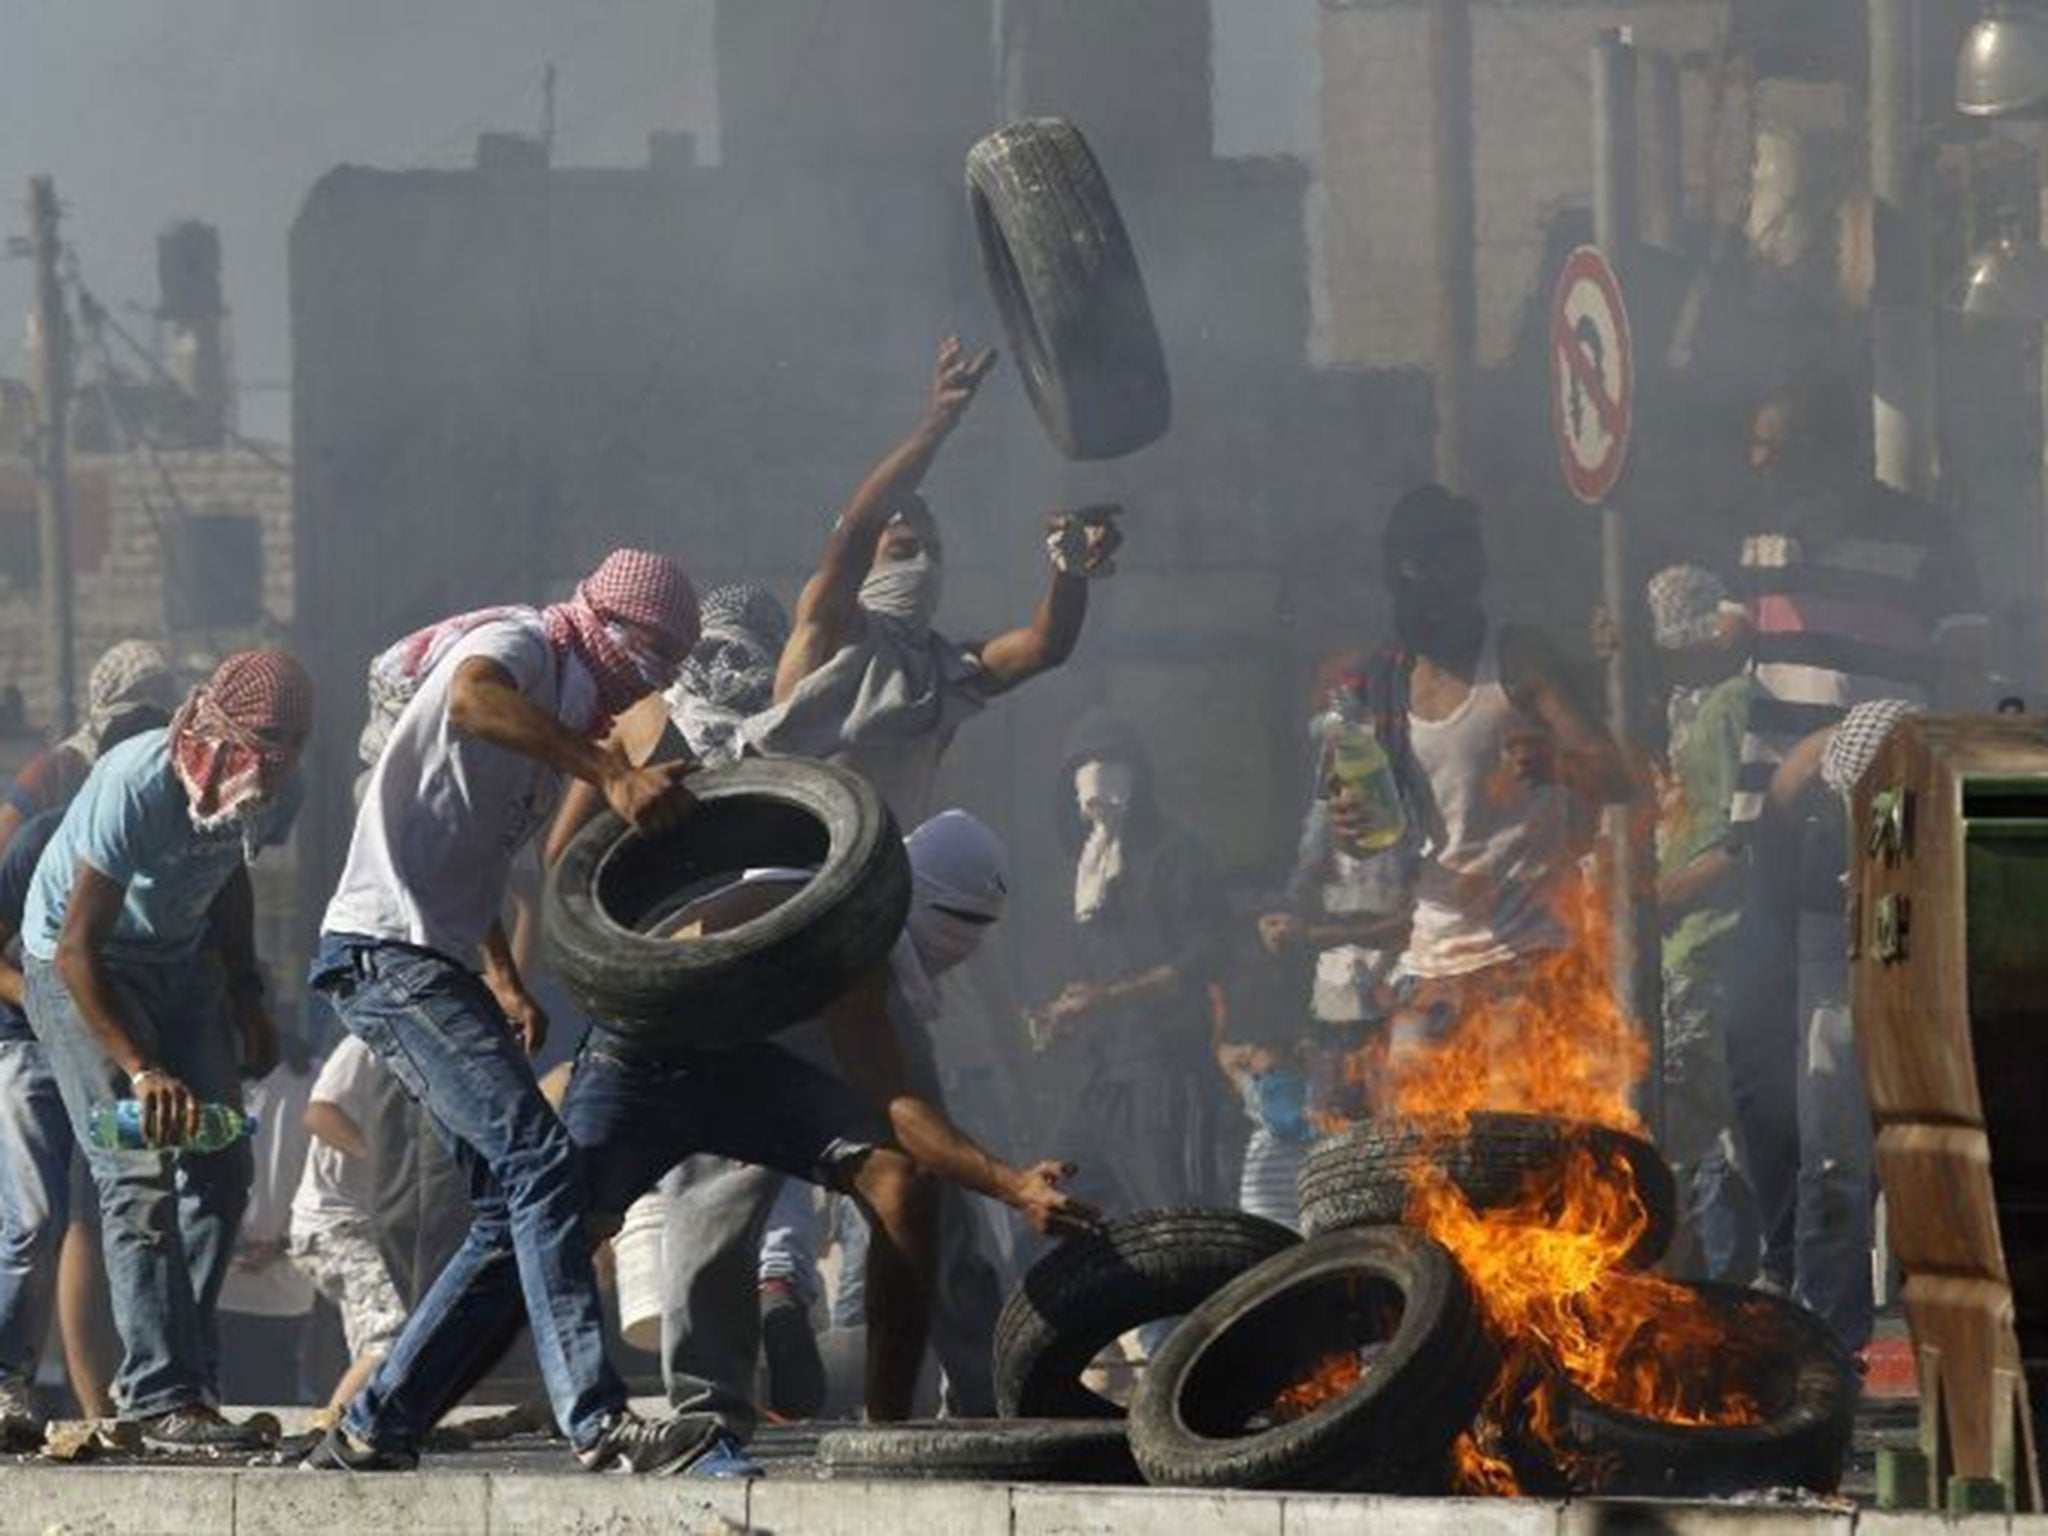 Palestinians set tyres ablaze during clashes with Israeli police in Shuafat, an Arab suburb of Jerusalem